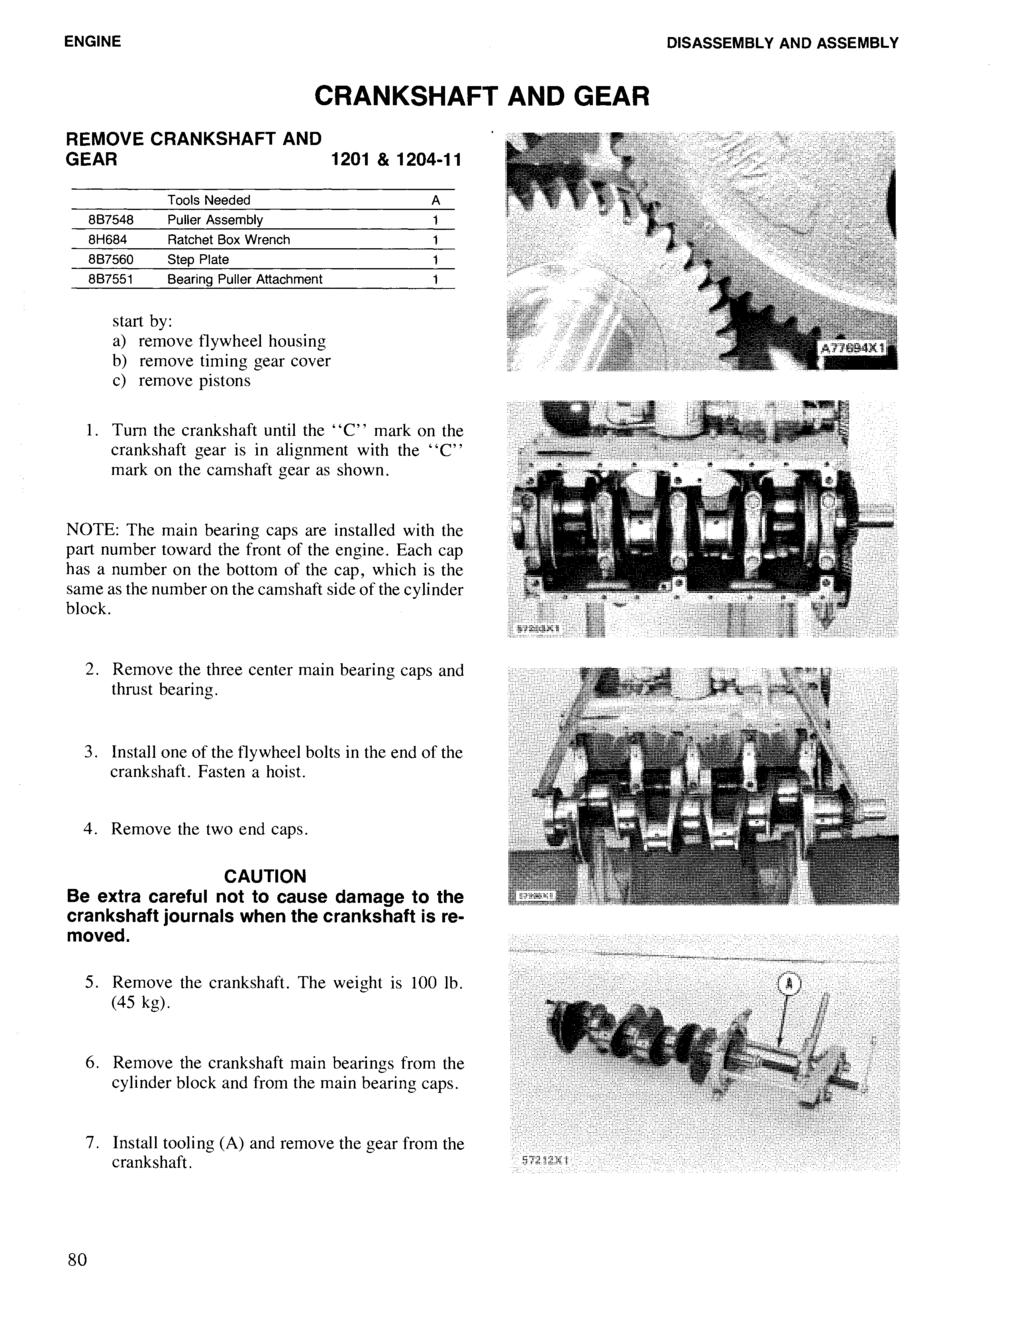 ENGINE DISASSEMBLY AND ASSEMBLY REMOVE CRANKSHAFT AND GEAR 1201 & 1204-11 CRANKSHAFT AND GEAR Tools Needed 887548 Puller Assembly 8H684 Ratchet 80x Wrench 887560 Step Plate 887551 8earing Puller